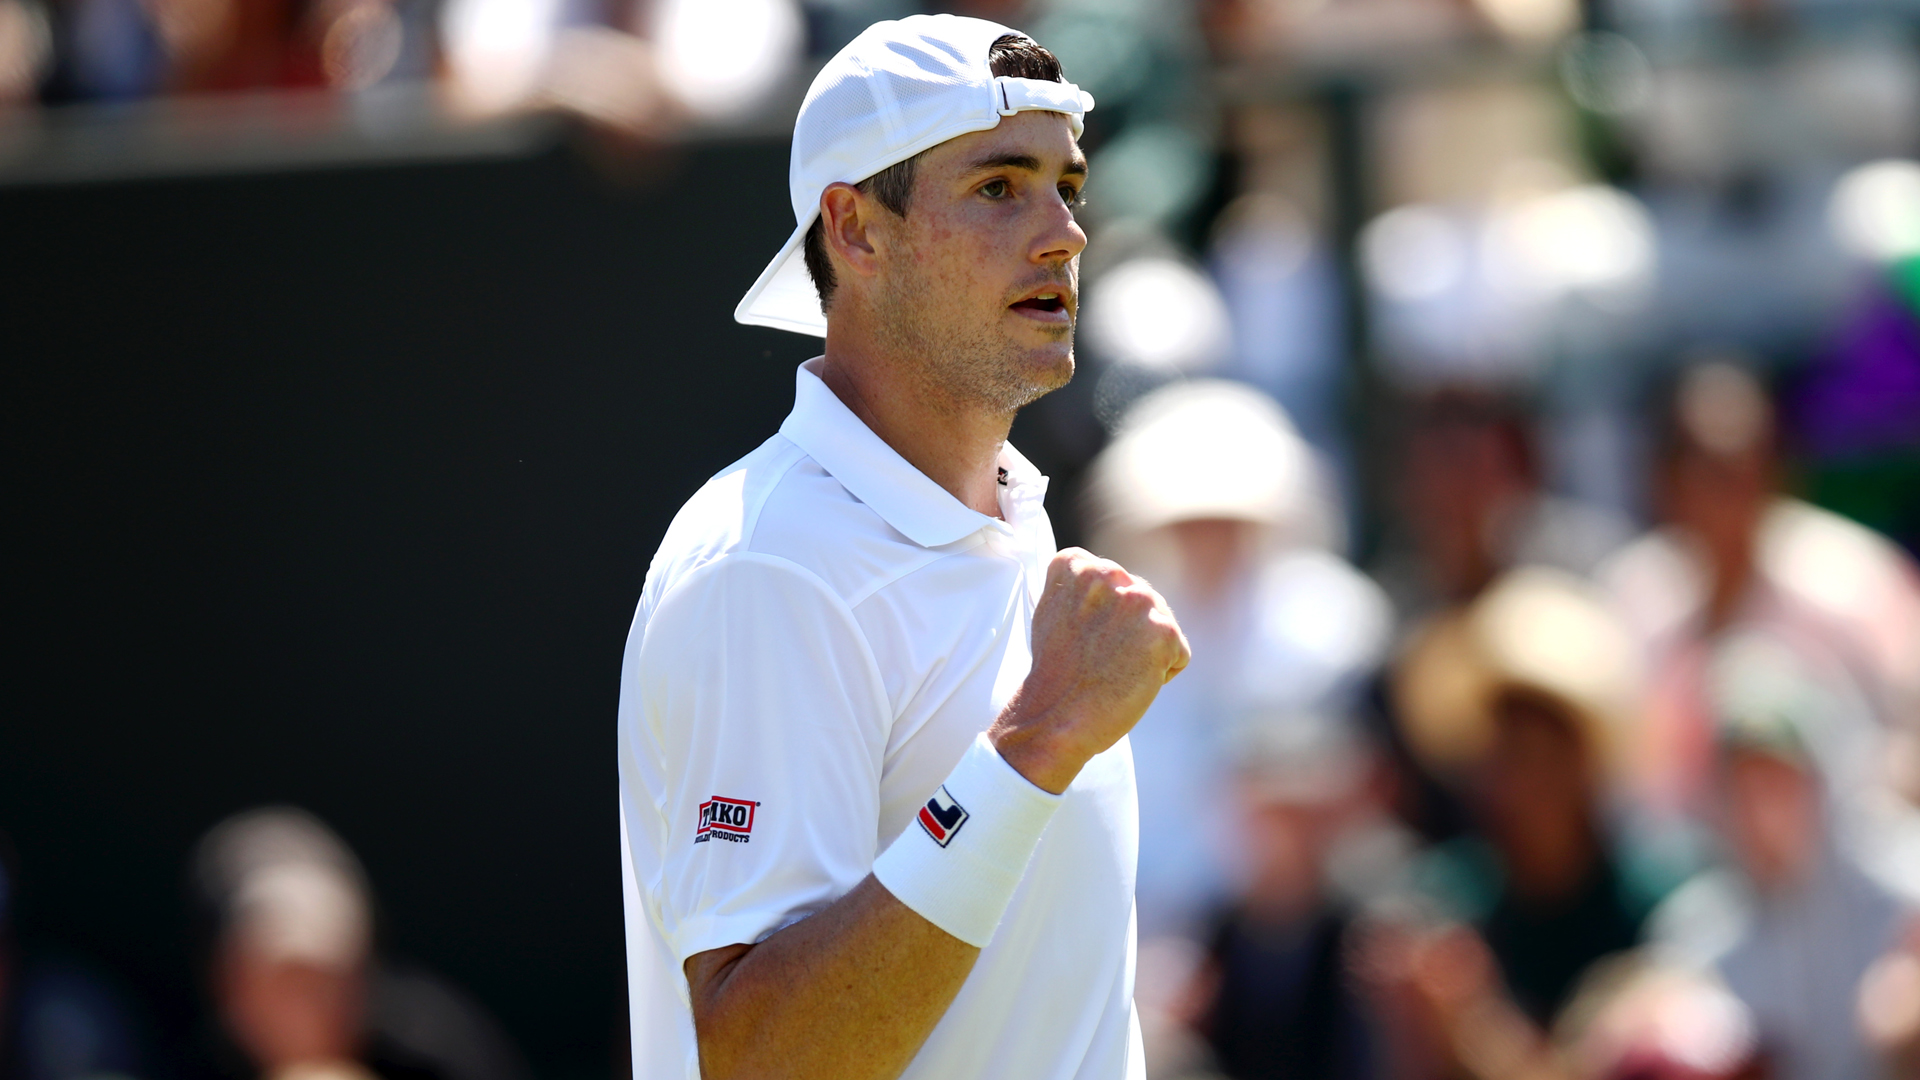 John Isner overcame Ugo Humbert in a tight semi-final at the Hall of Fame Tennis Championships.